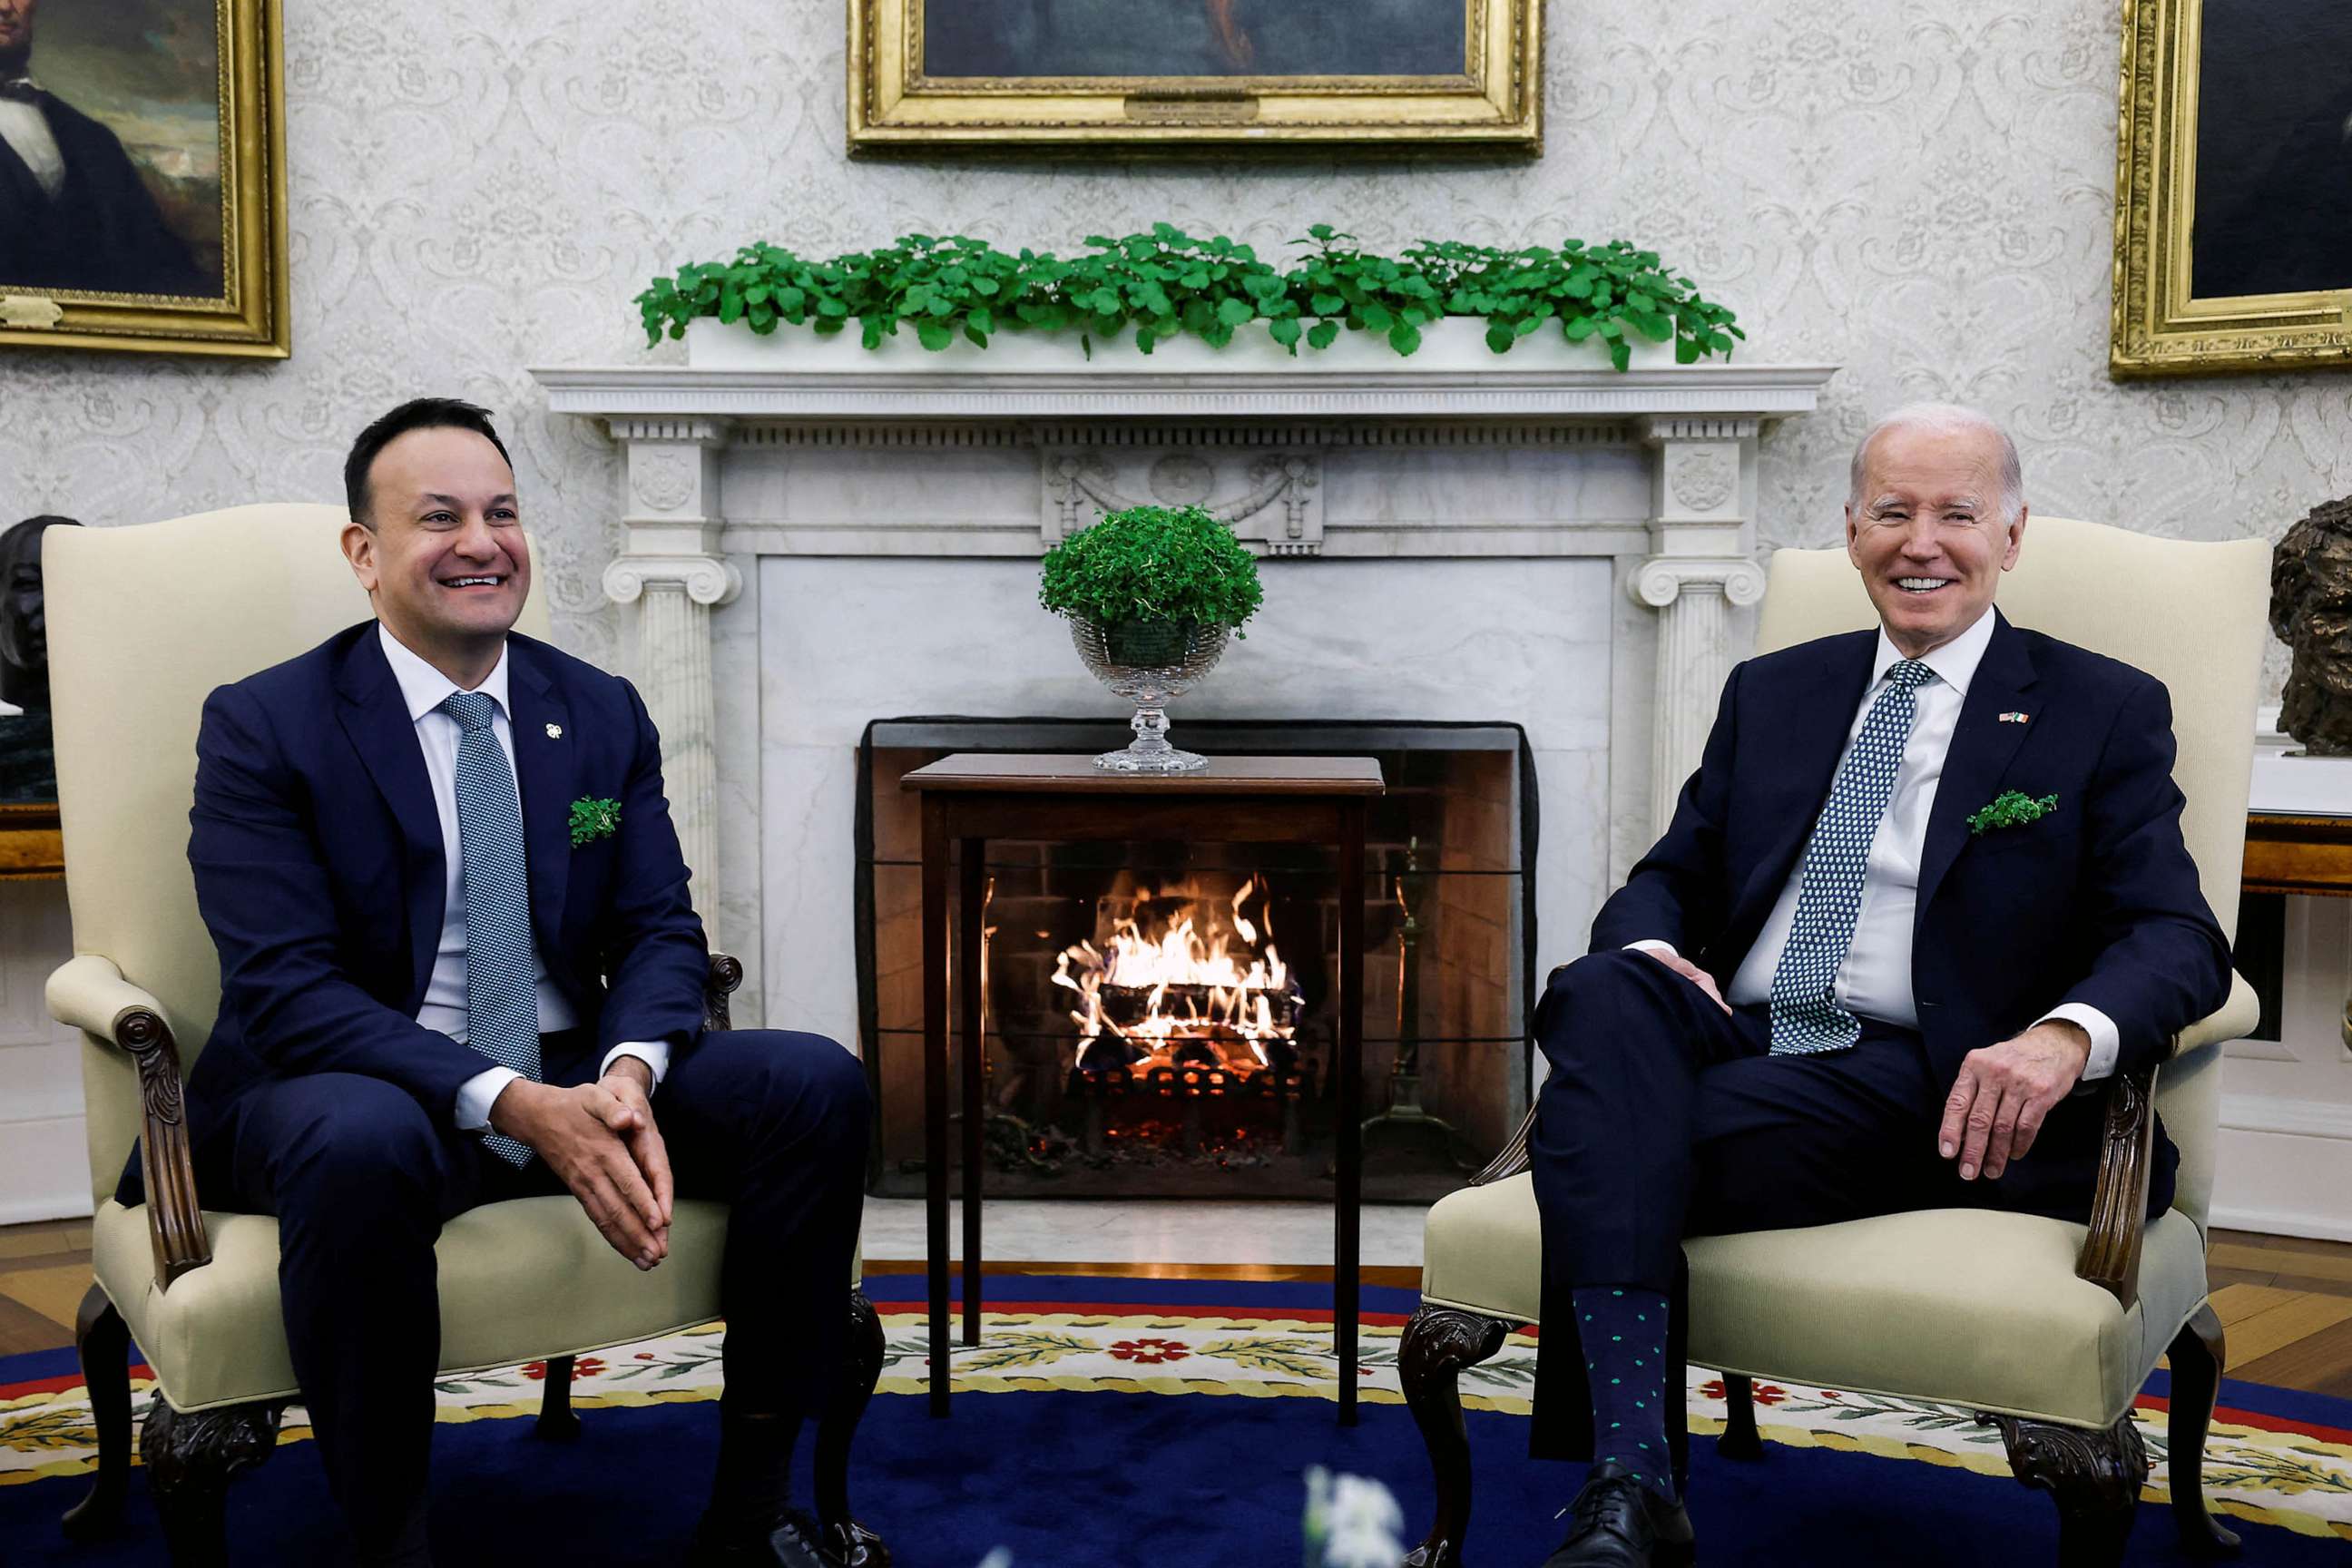 PHOTO: Ireland's Prime Minister (Taoiseach) Leo Varadkar meets with U.S. President Joe Biden in the Oval Office at the White House in Washington, March 17, 2023.